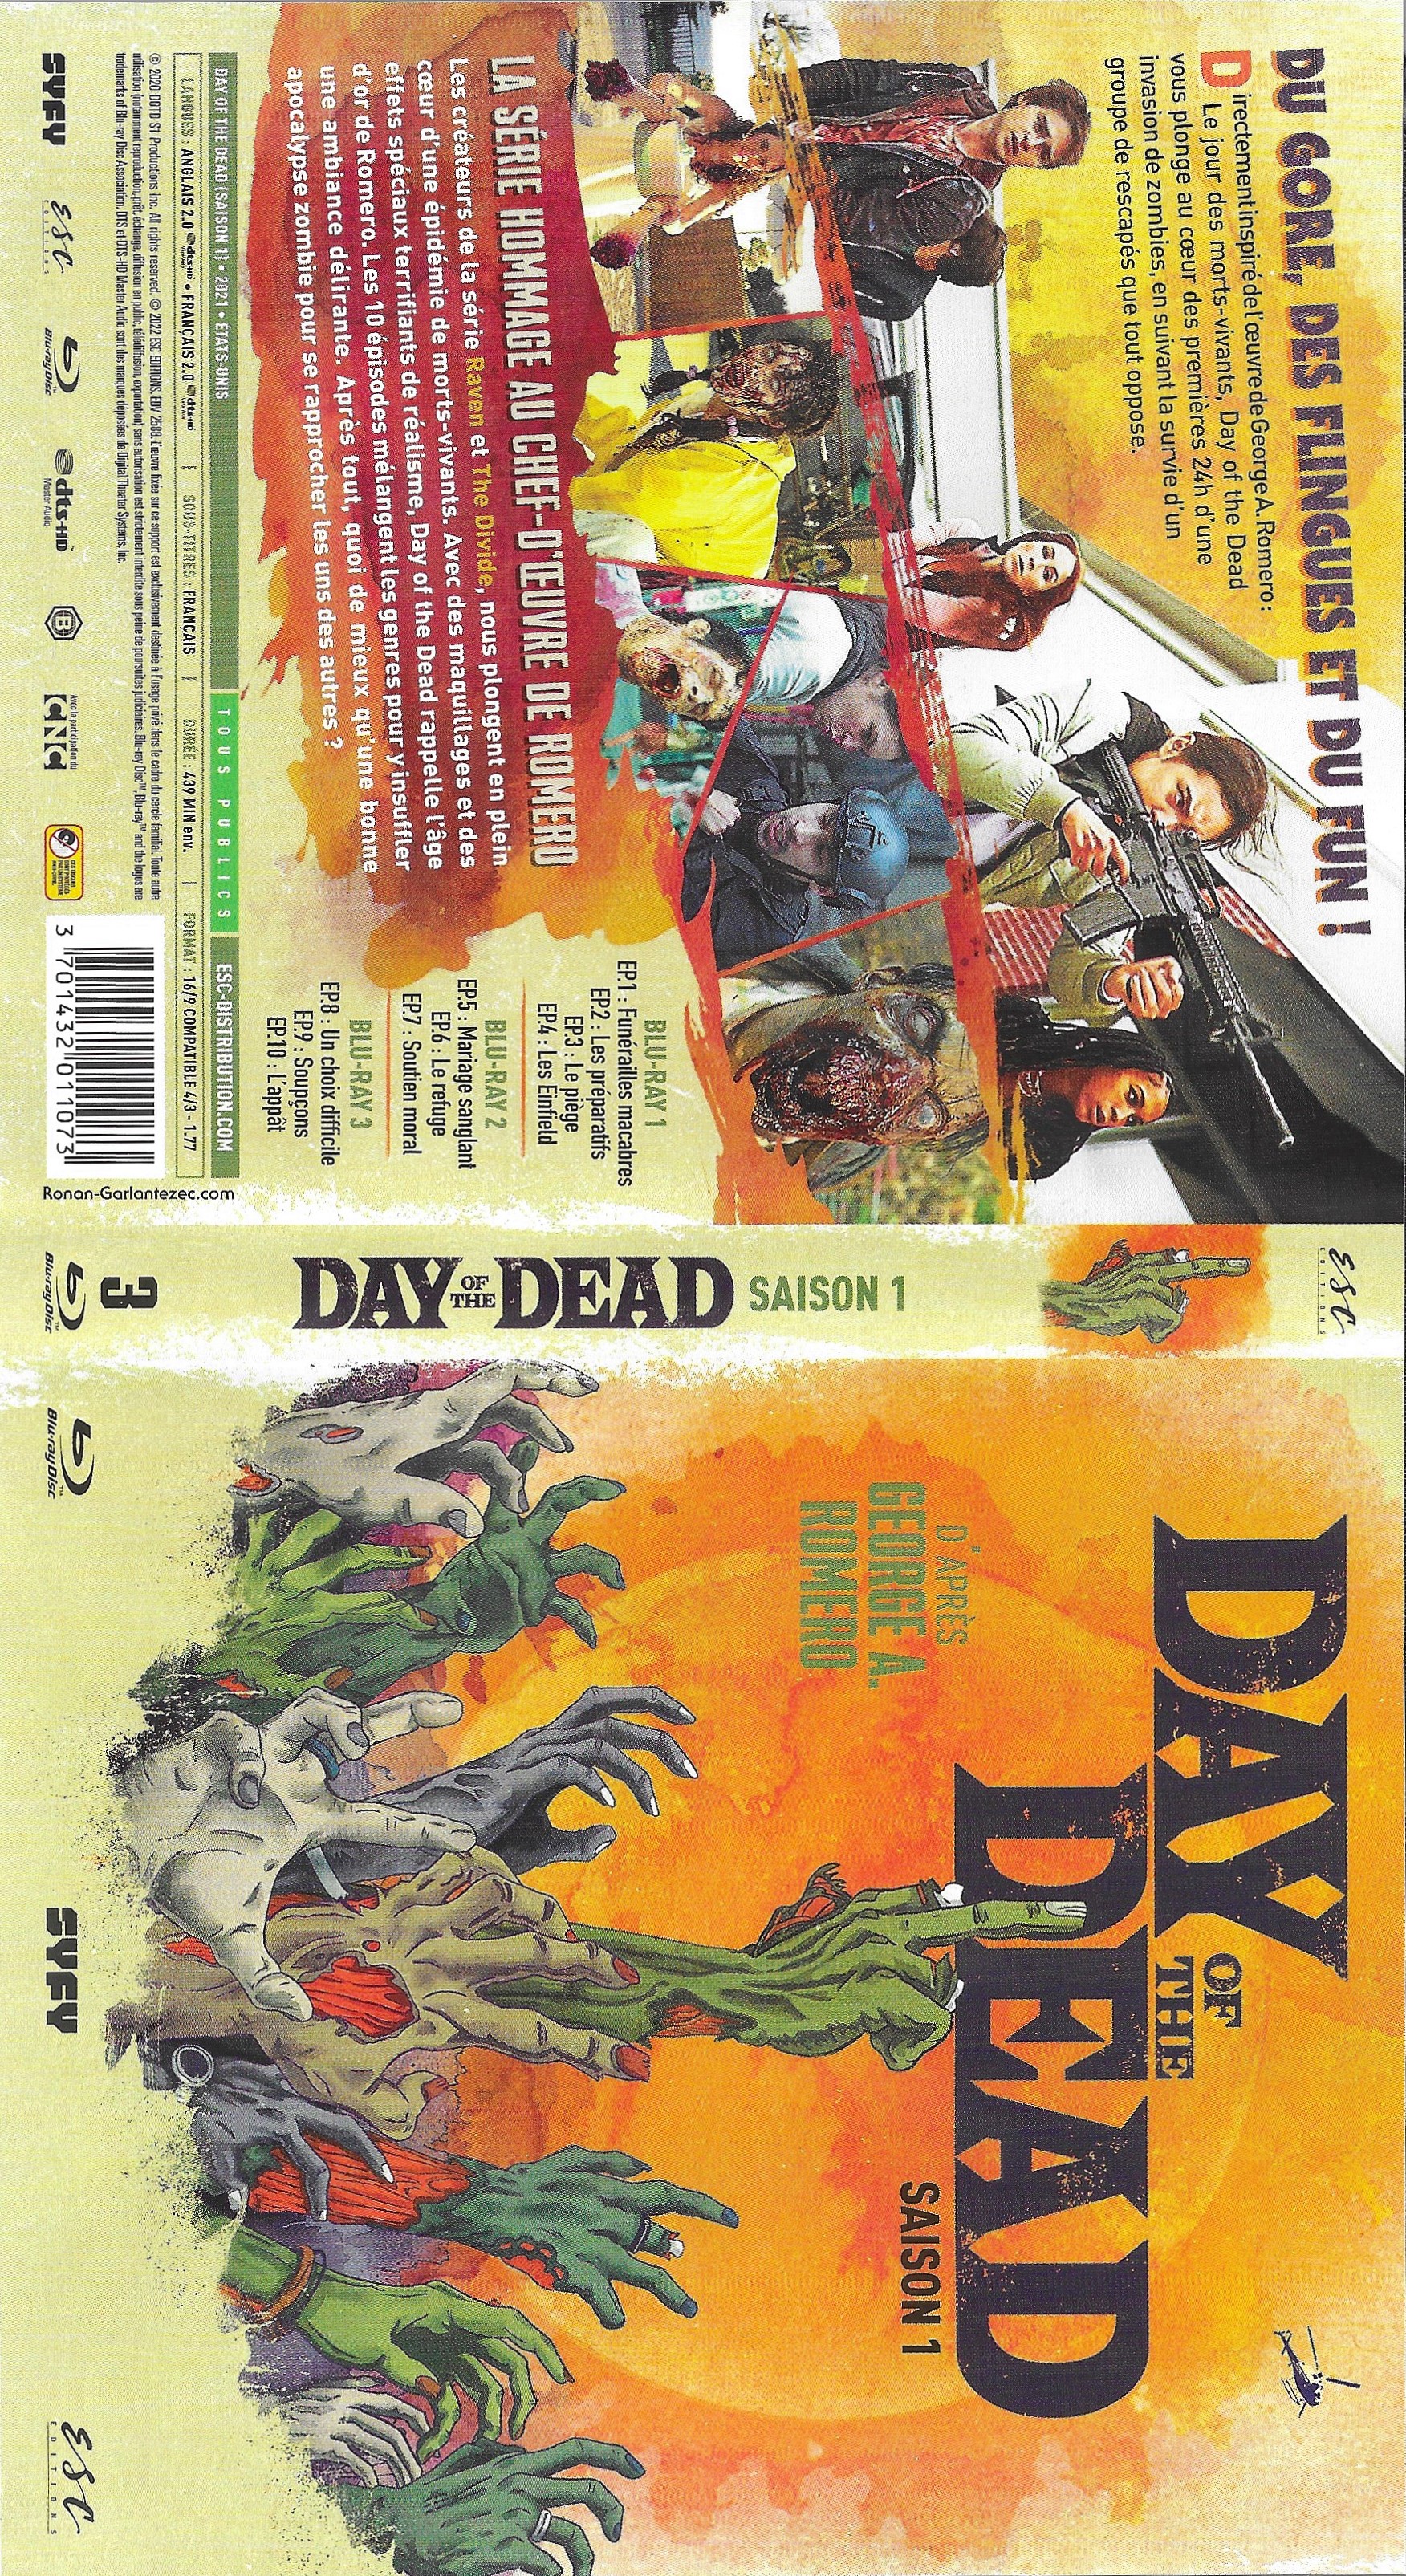 Jaquette DVD Day of the dead saison 1 (BLU-RAY)